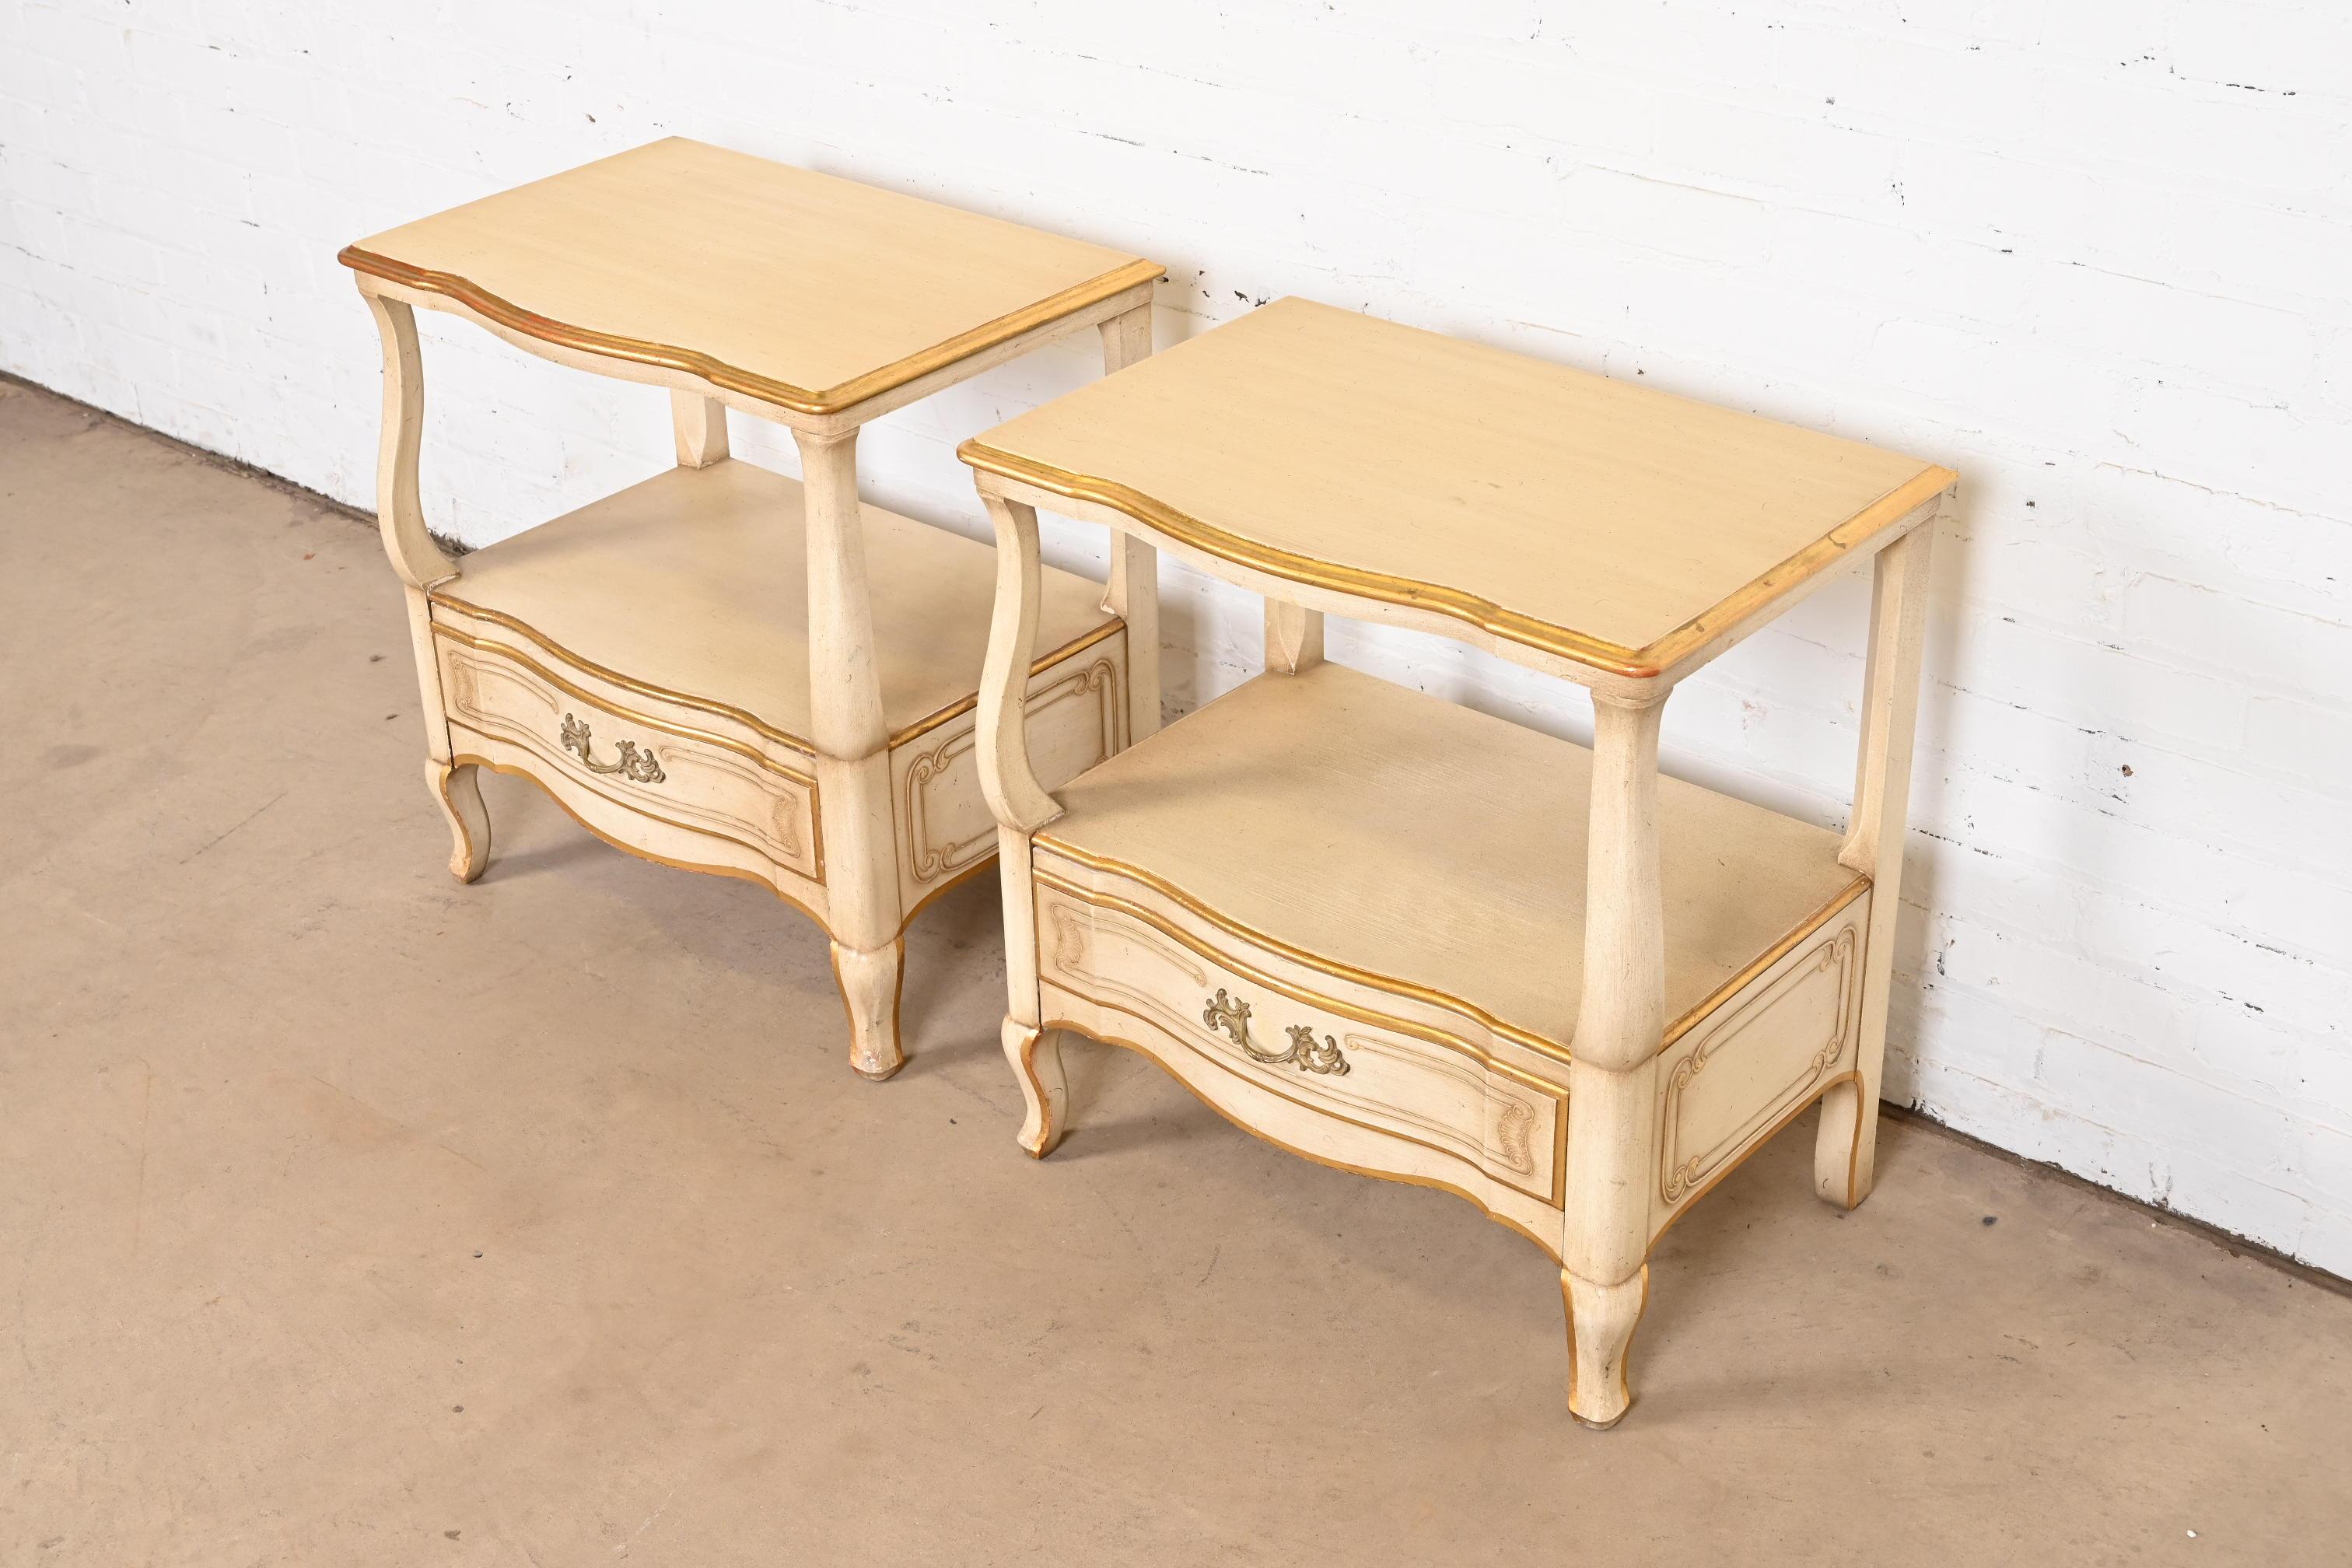 Mid-20th Century John Widdicomb French Provincial Louis XV Nightstands, Circa 1950s For Sale